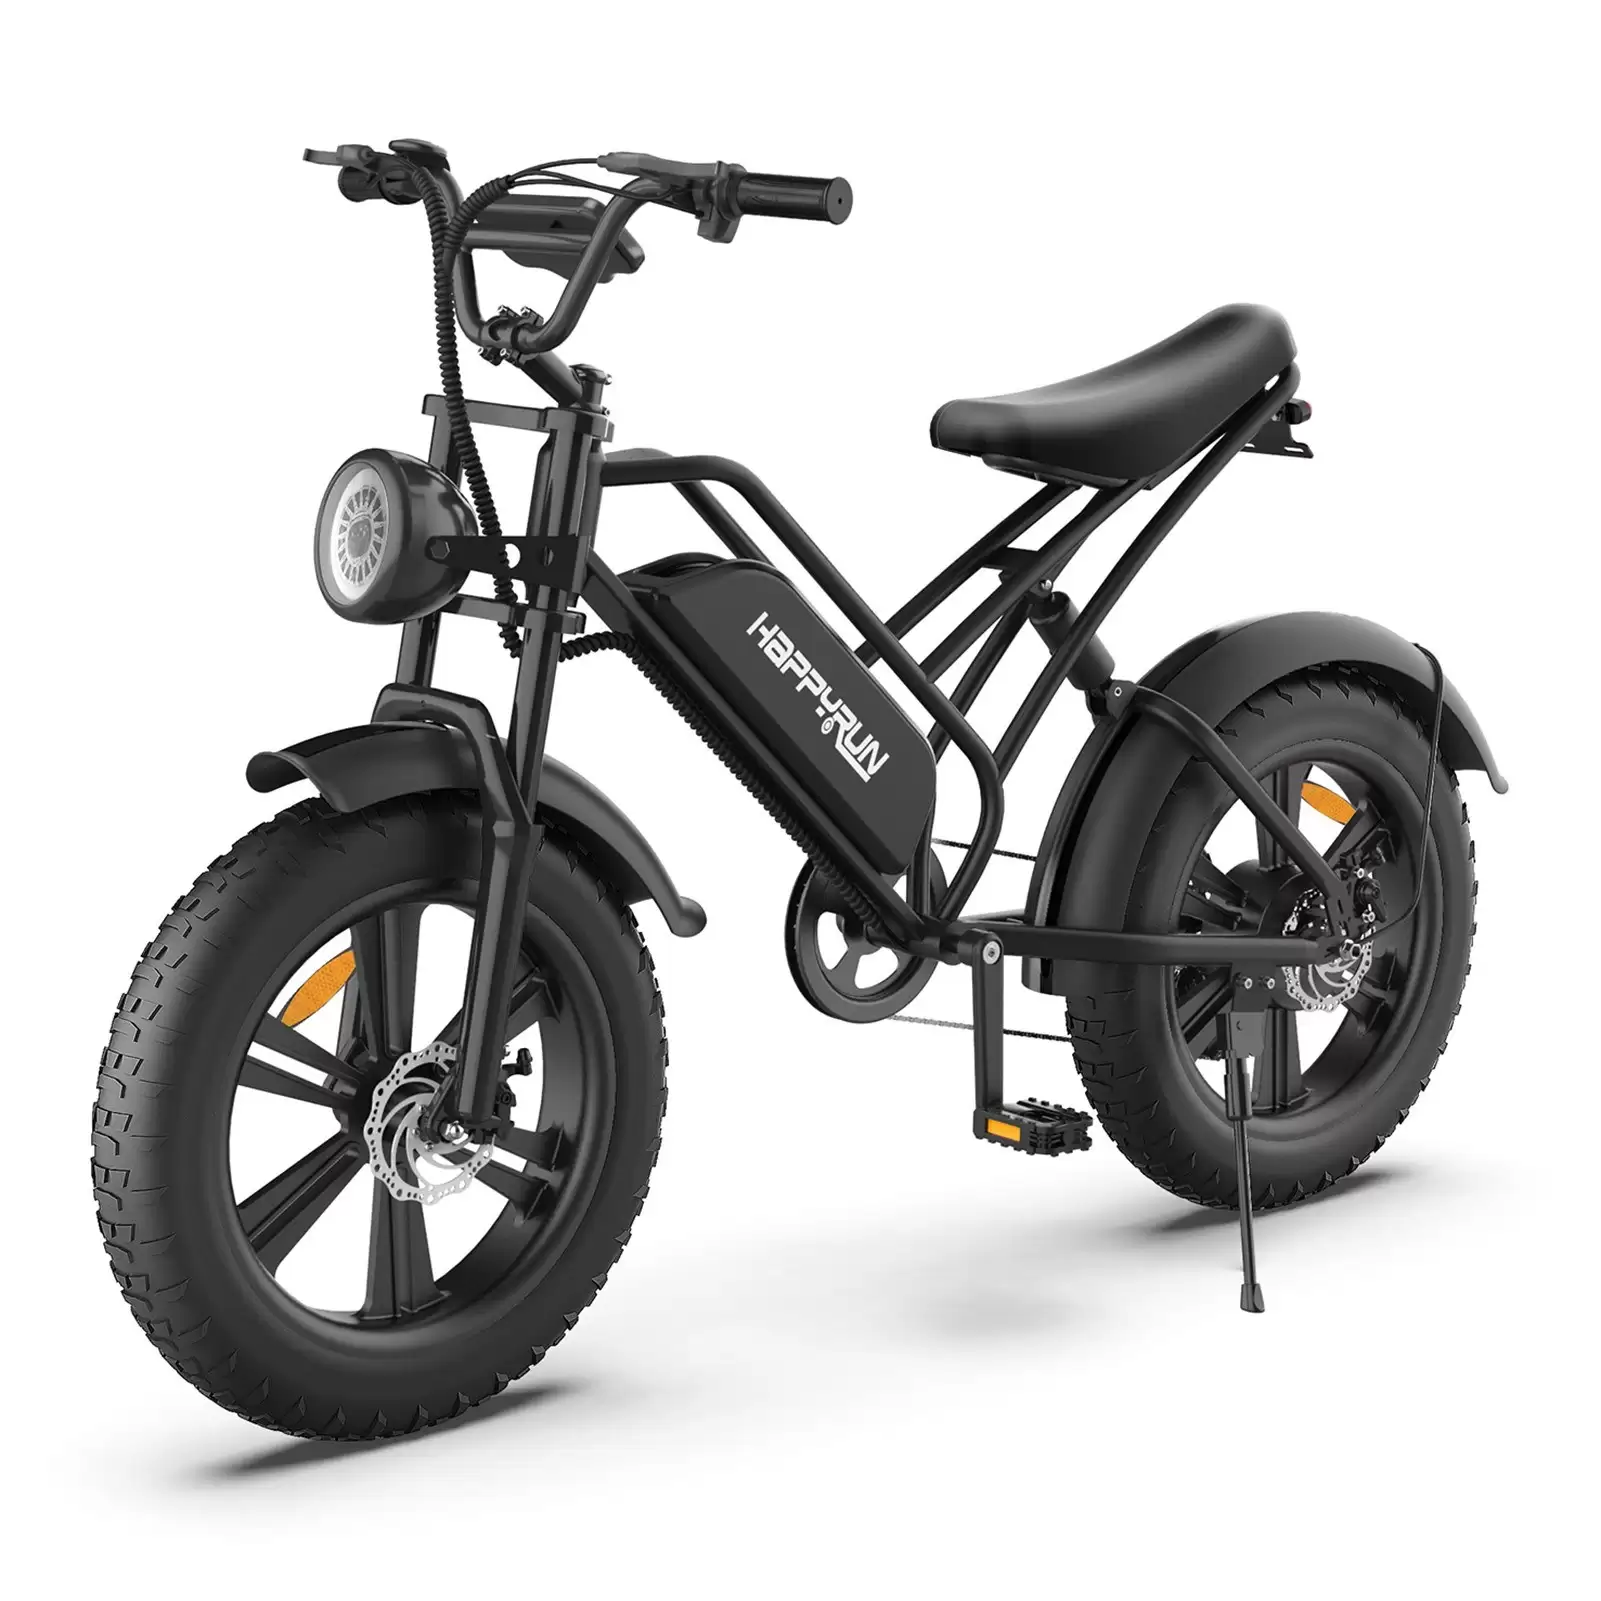 Order In Just $969.99 Happyrun G50 E-Bike 750w Brushless Motor Using This Tomtop Discount Code